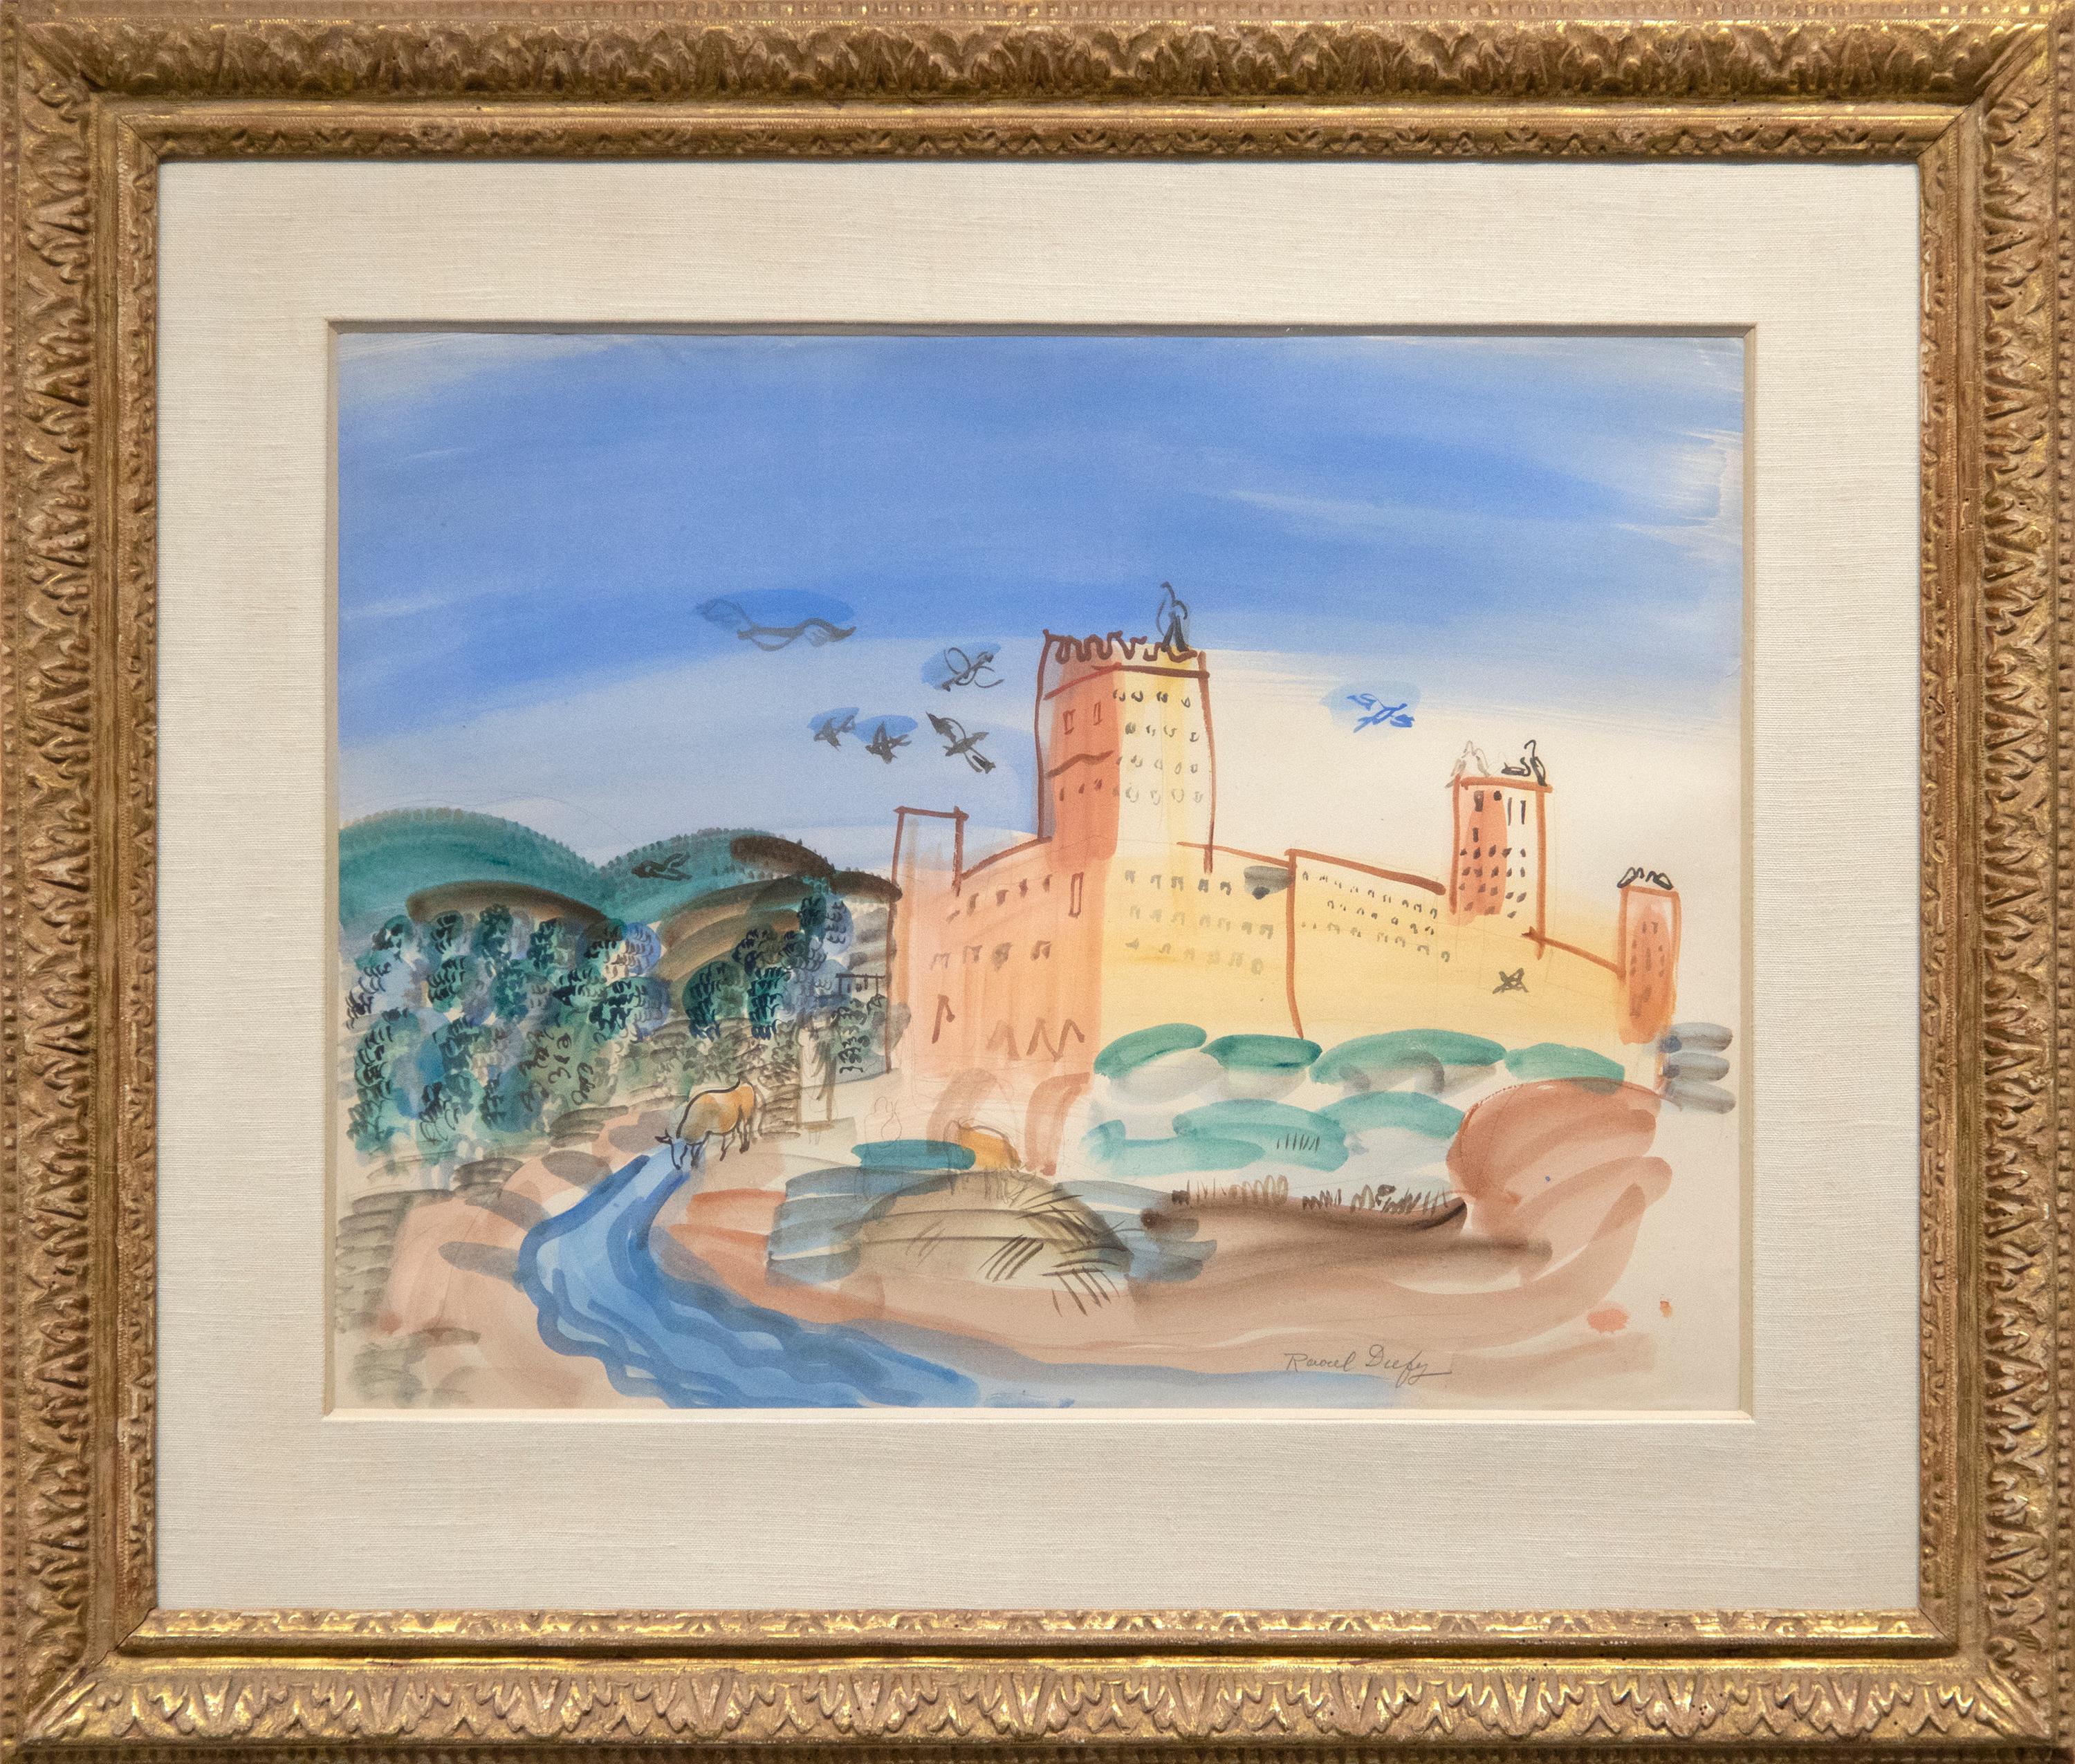 Paysage de Maroc - Painting by Raoul Dufy